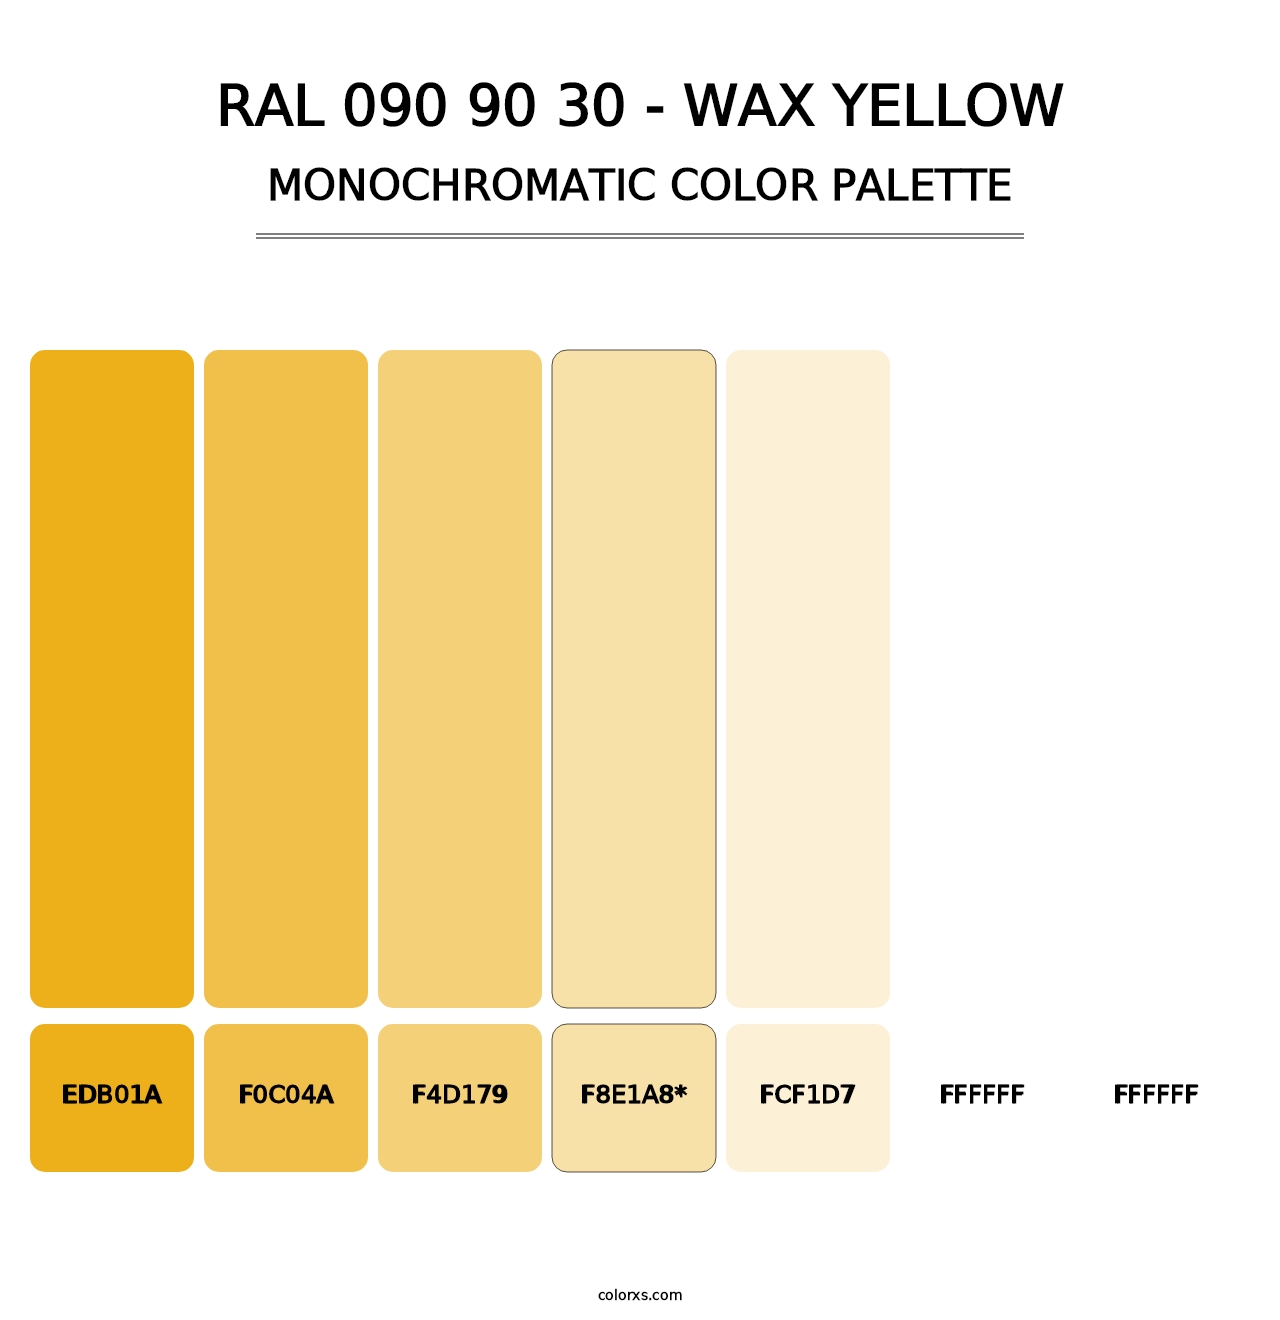 RAL 090 90 30 - Wax Yellow - Monochromatic Color Palette